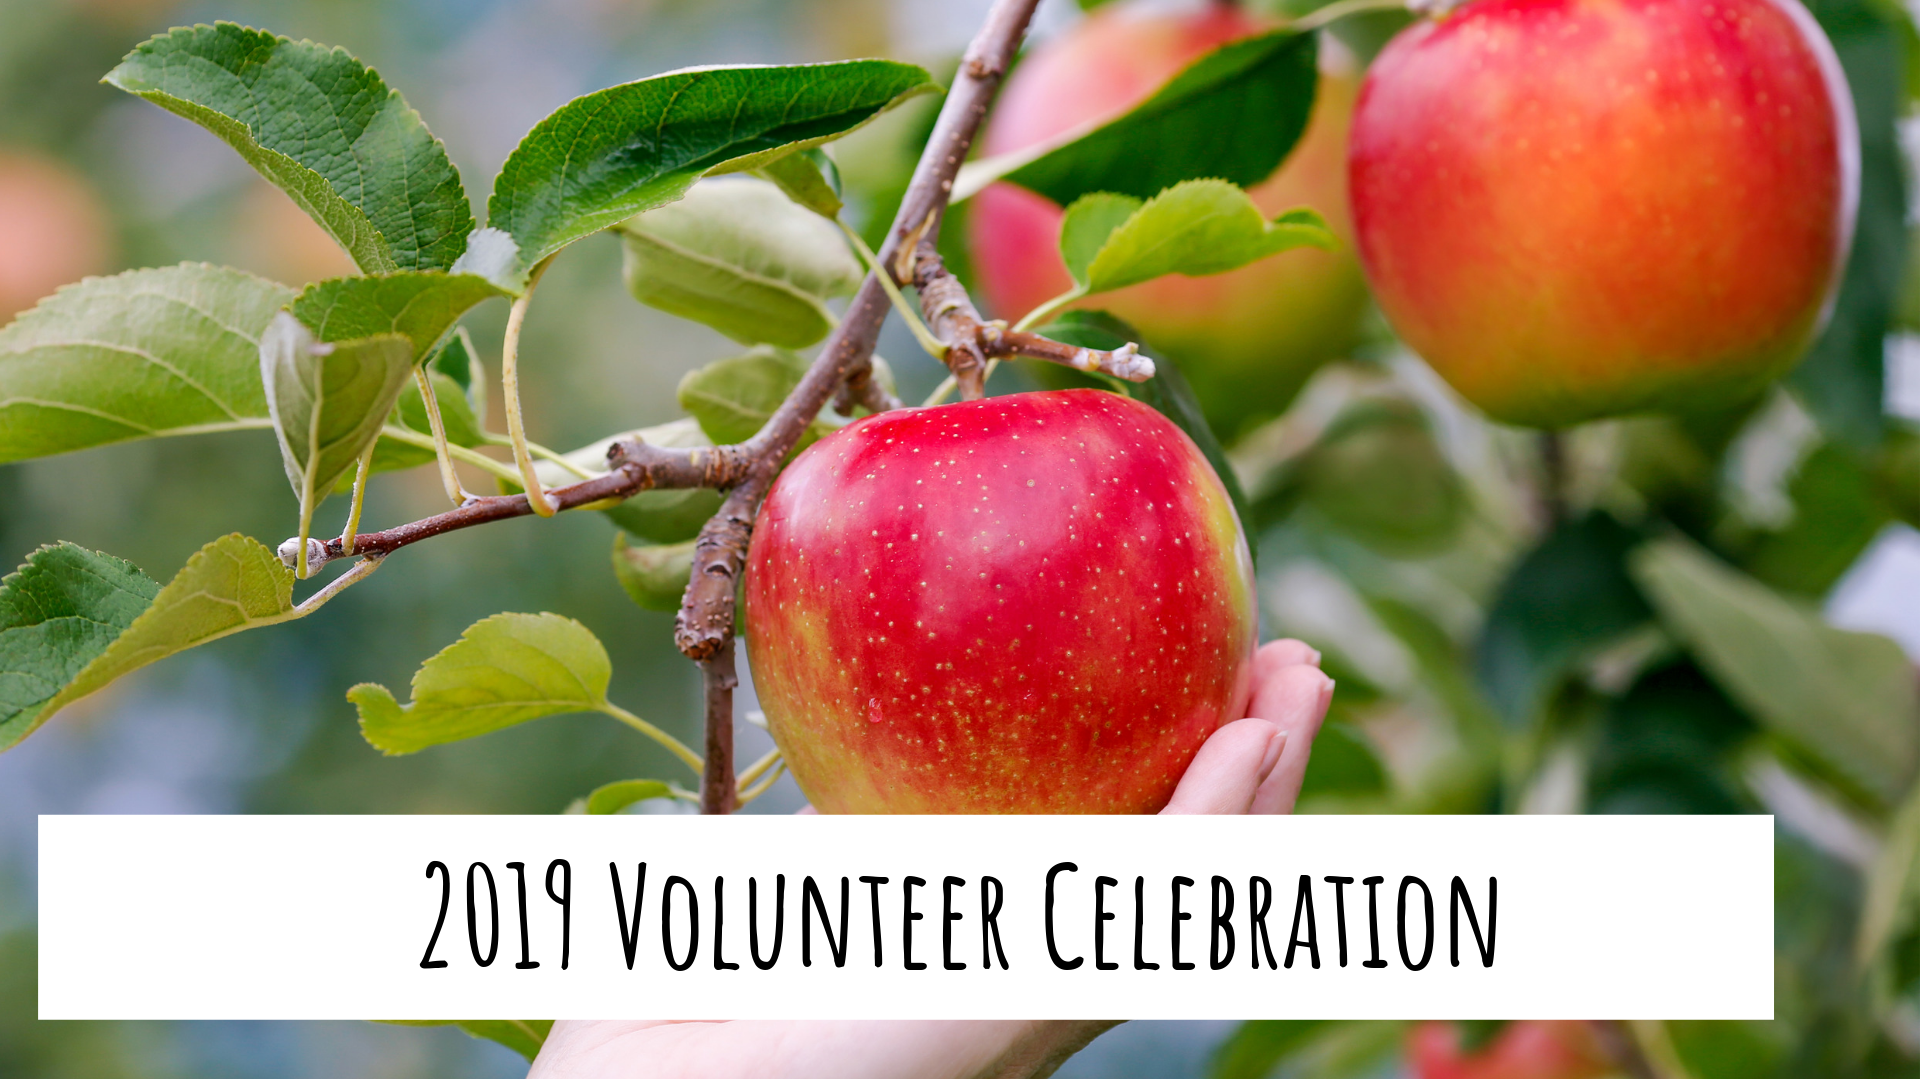 close up of a hand picking an apple from a tree with the words "2019 volunteer Celebration"